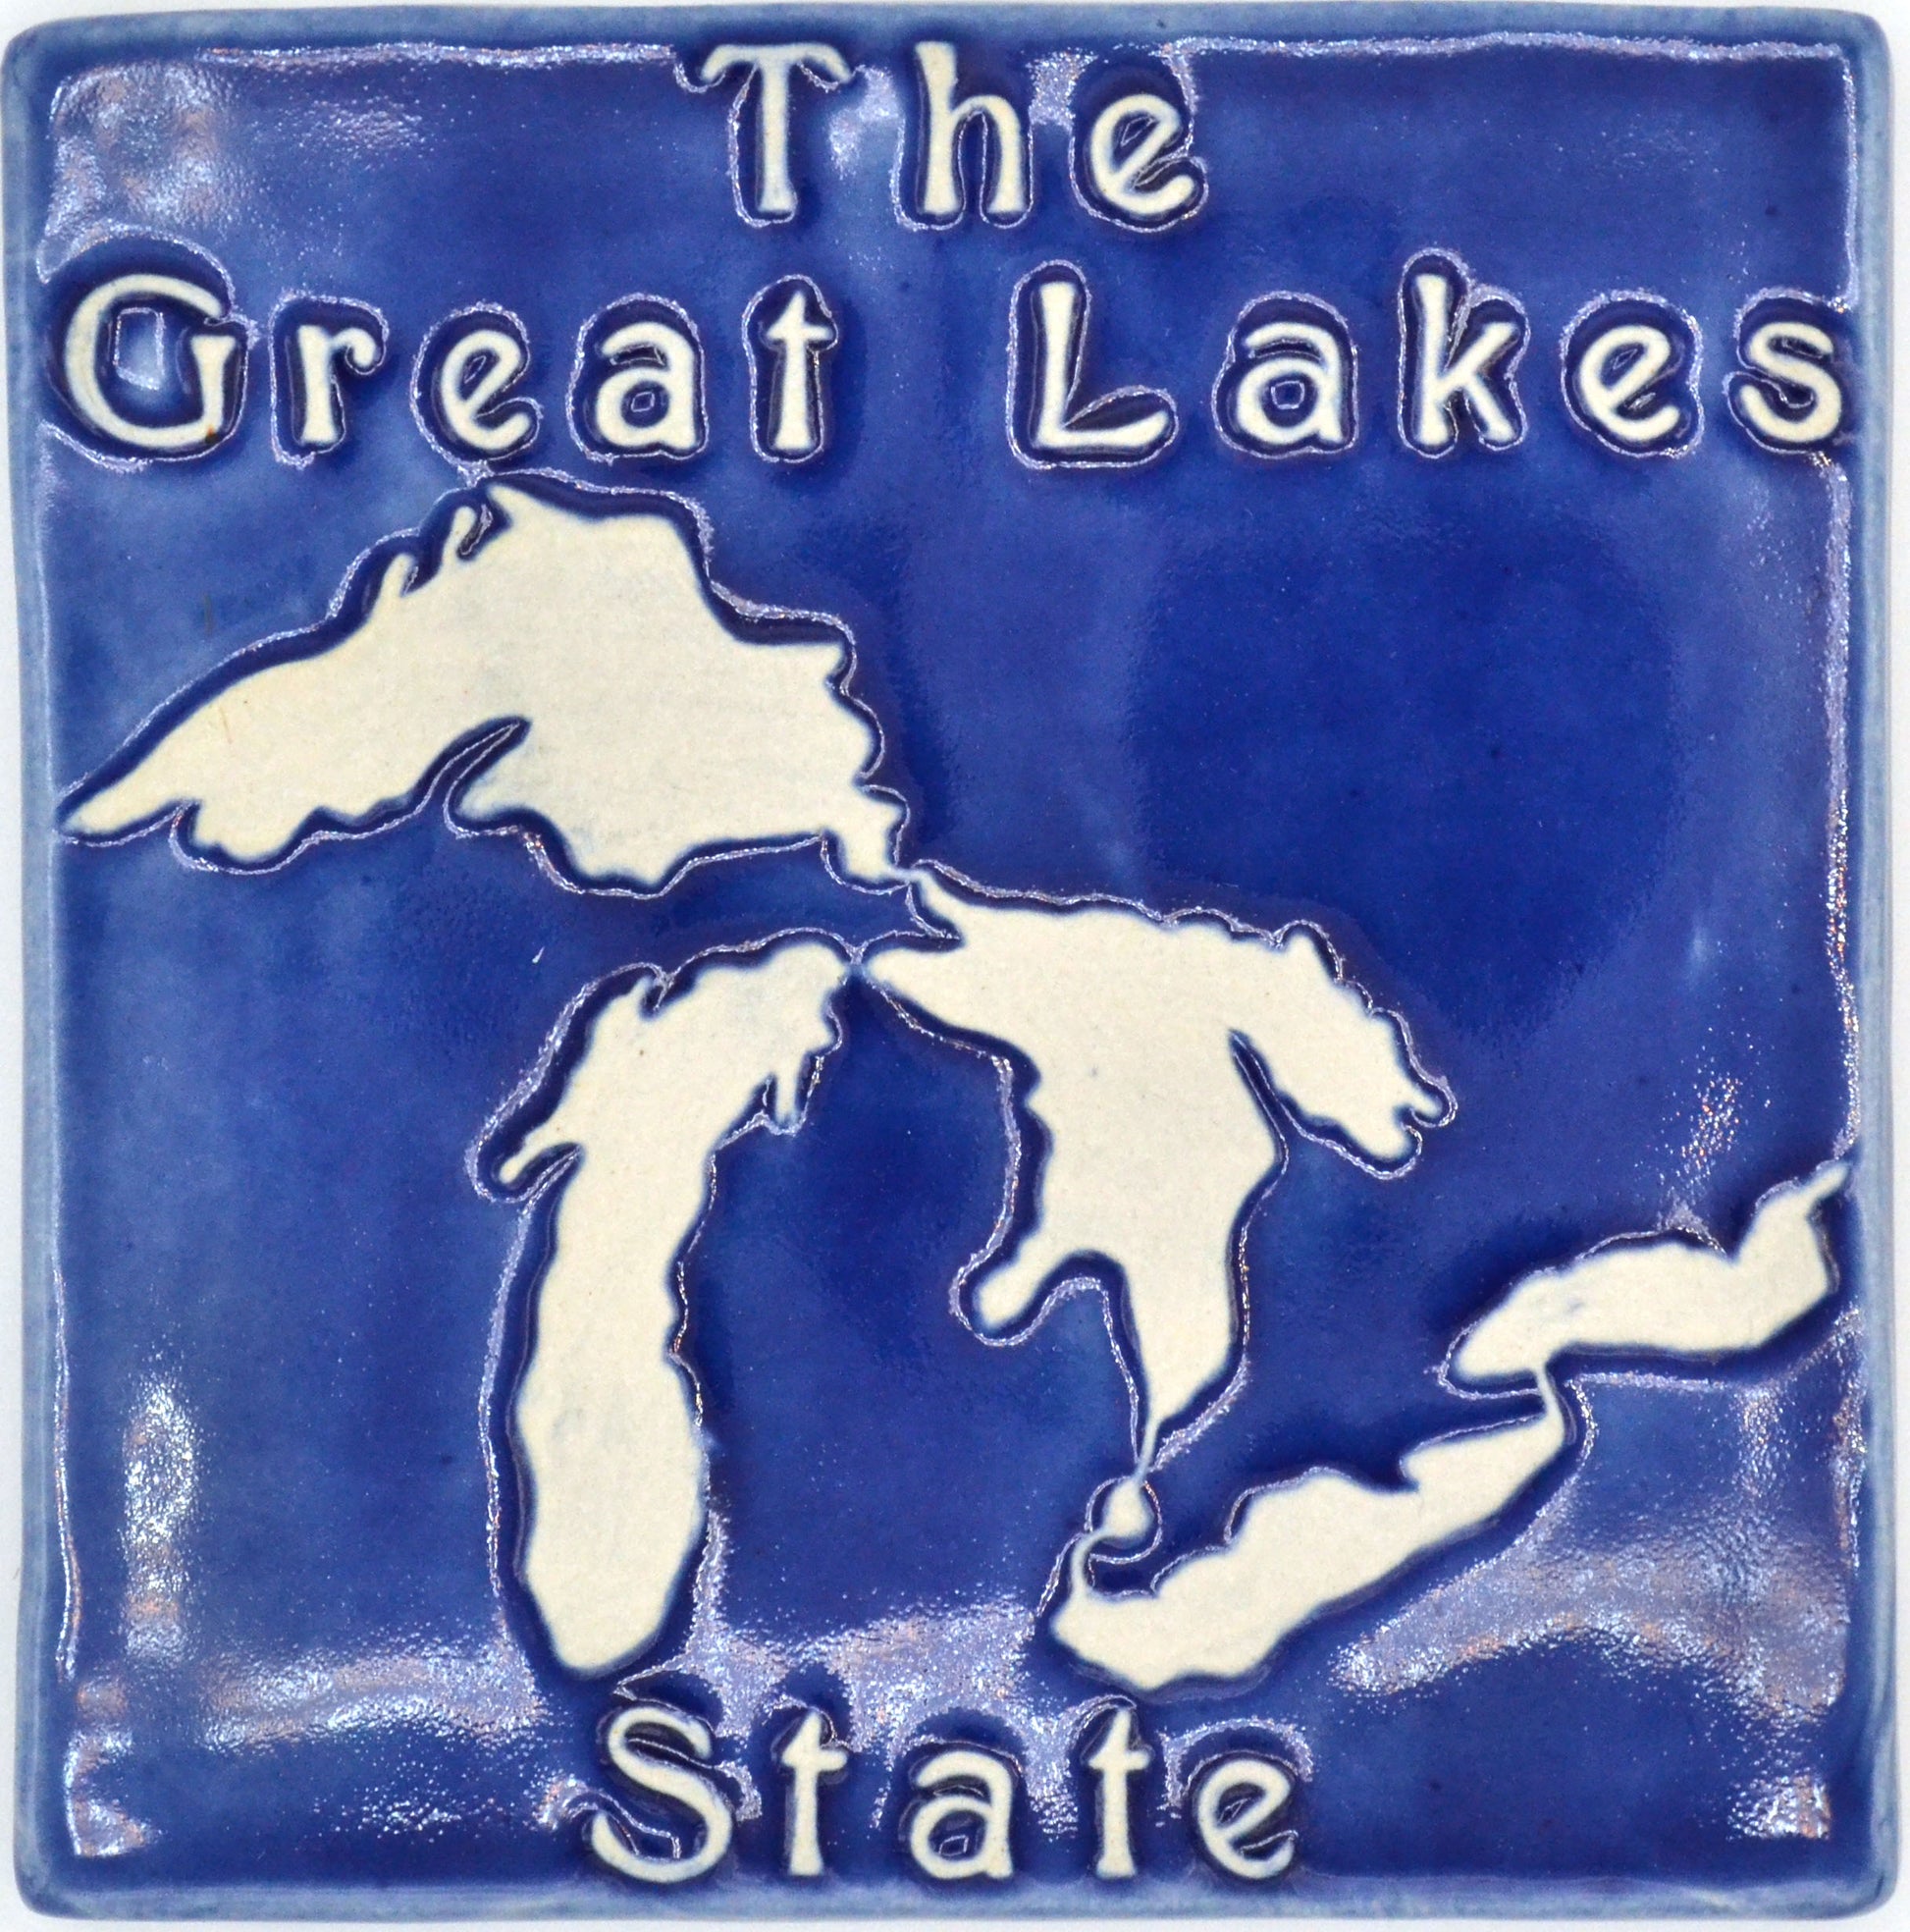 6x6 great lakes state tile blue